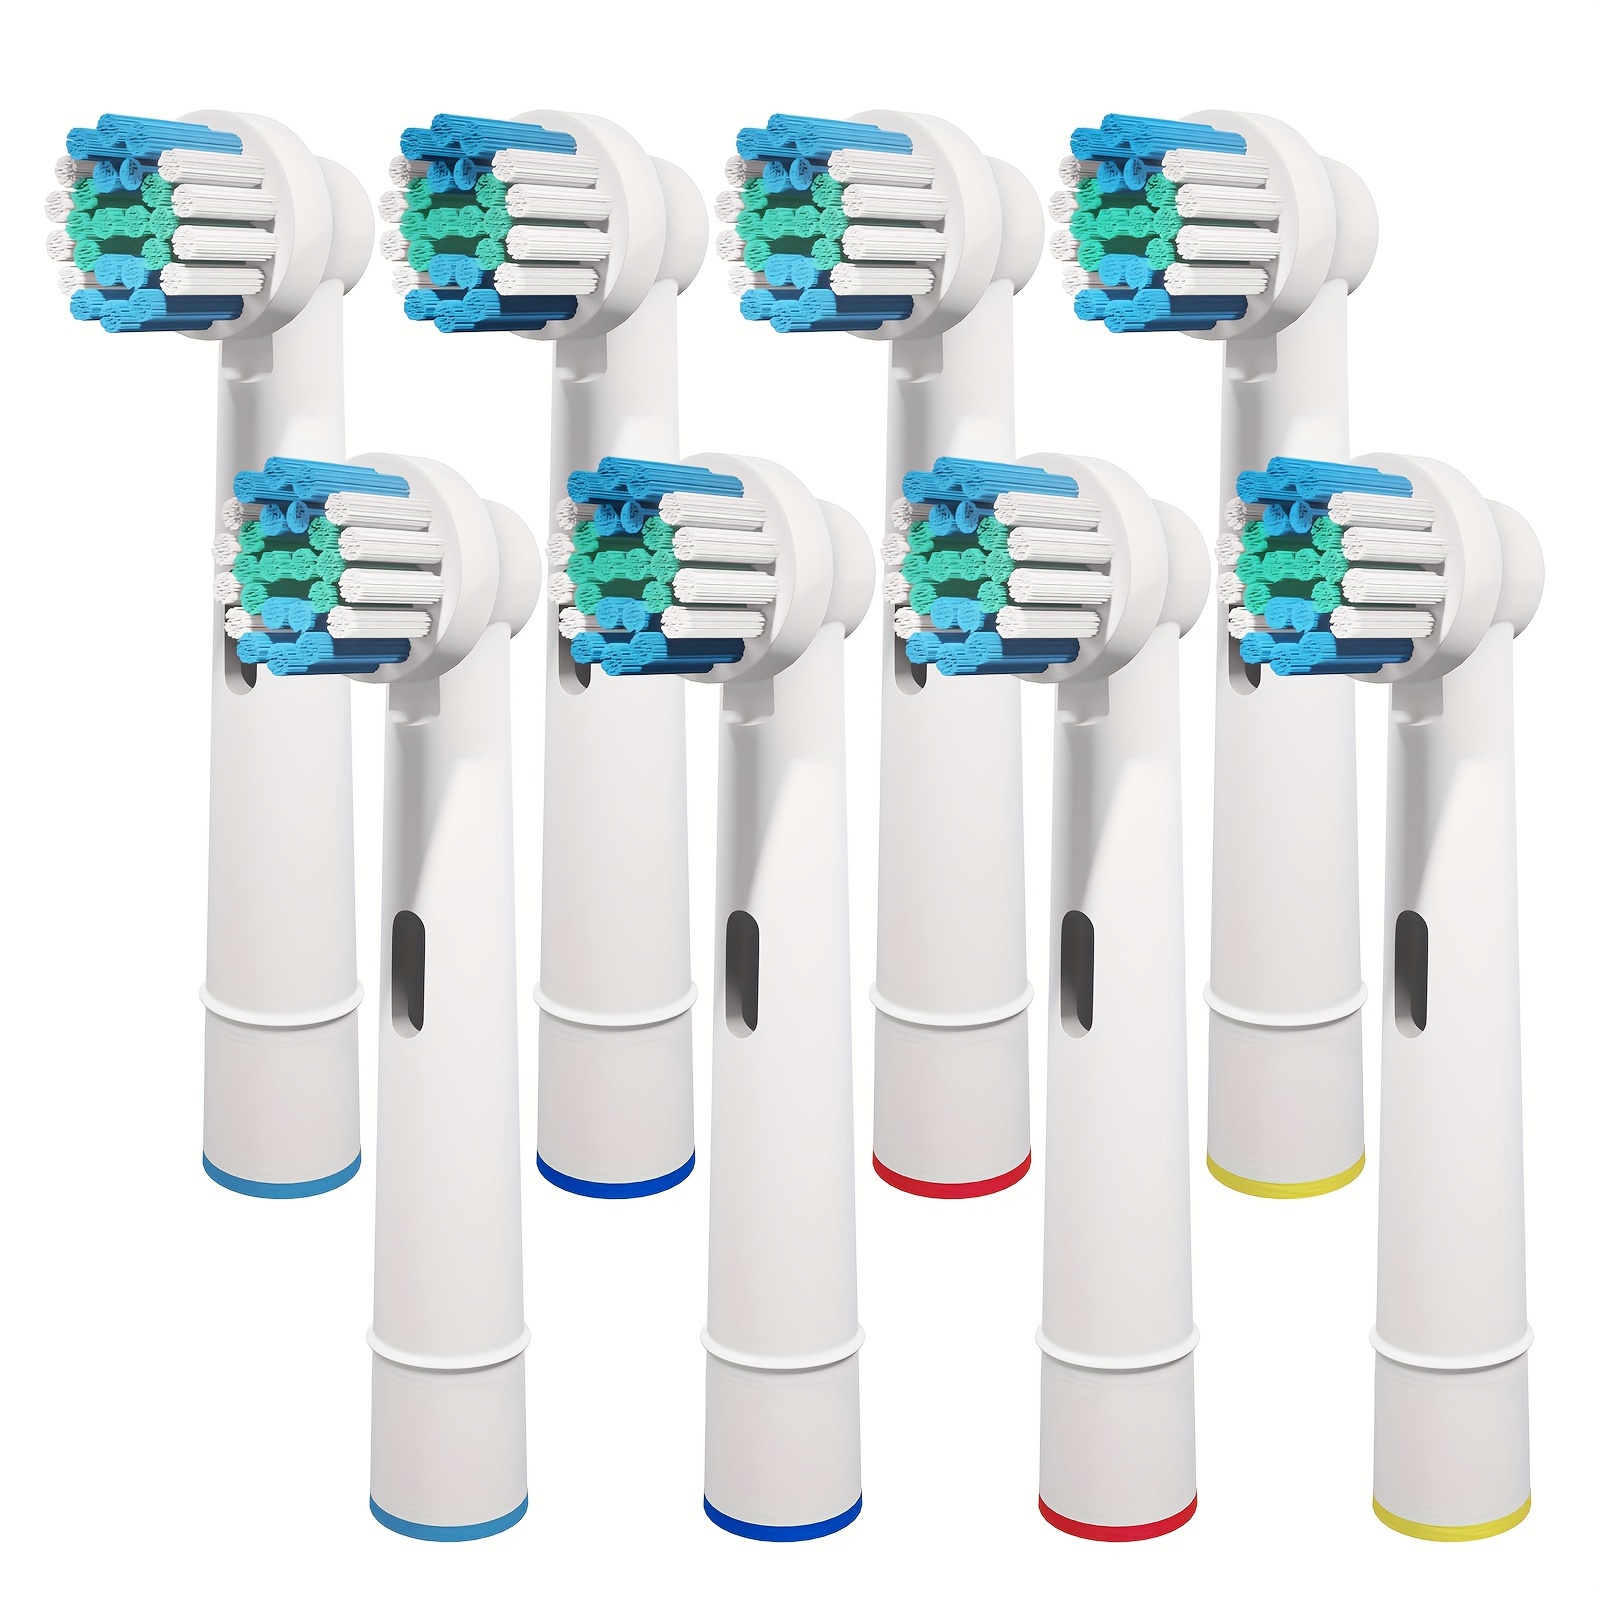 

8-piece Electric Toothbrush Replacement Heads, Suitable For Eb Series